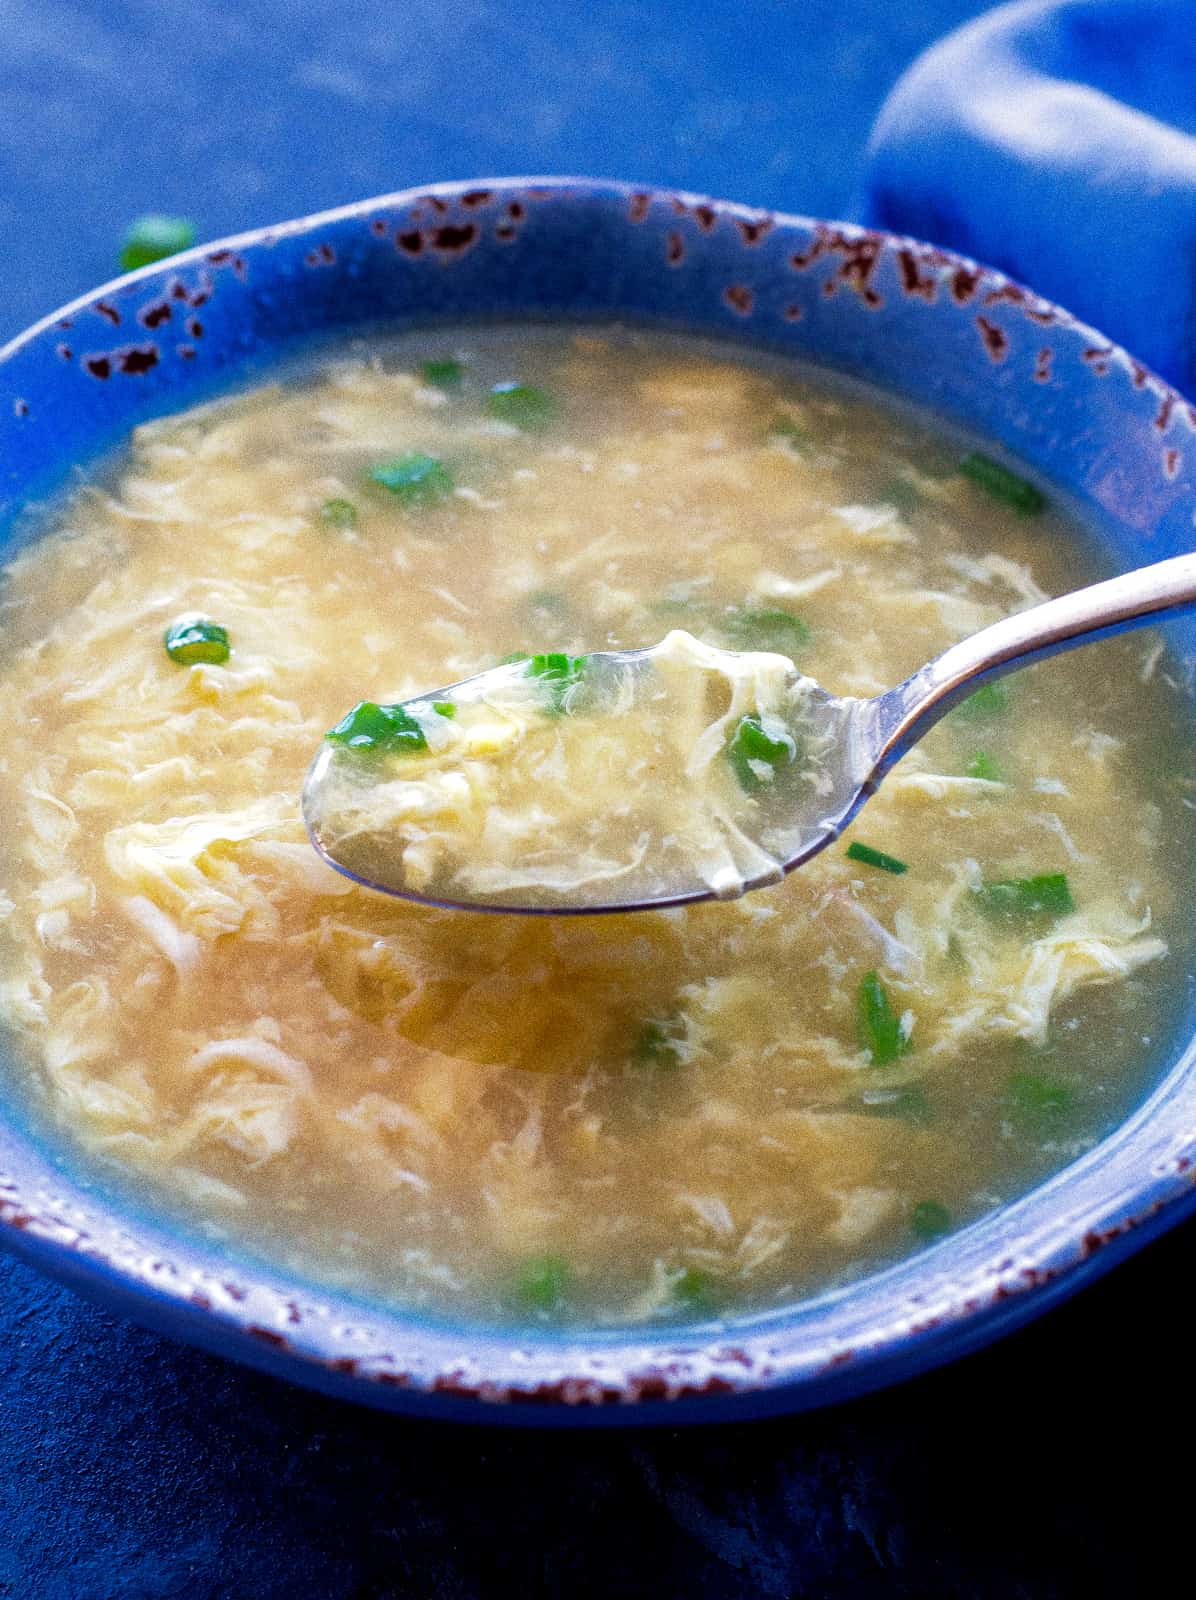 The Best Egg Drop Soup Recipe (+VIDEO) - The Girl Who Ate Everything